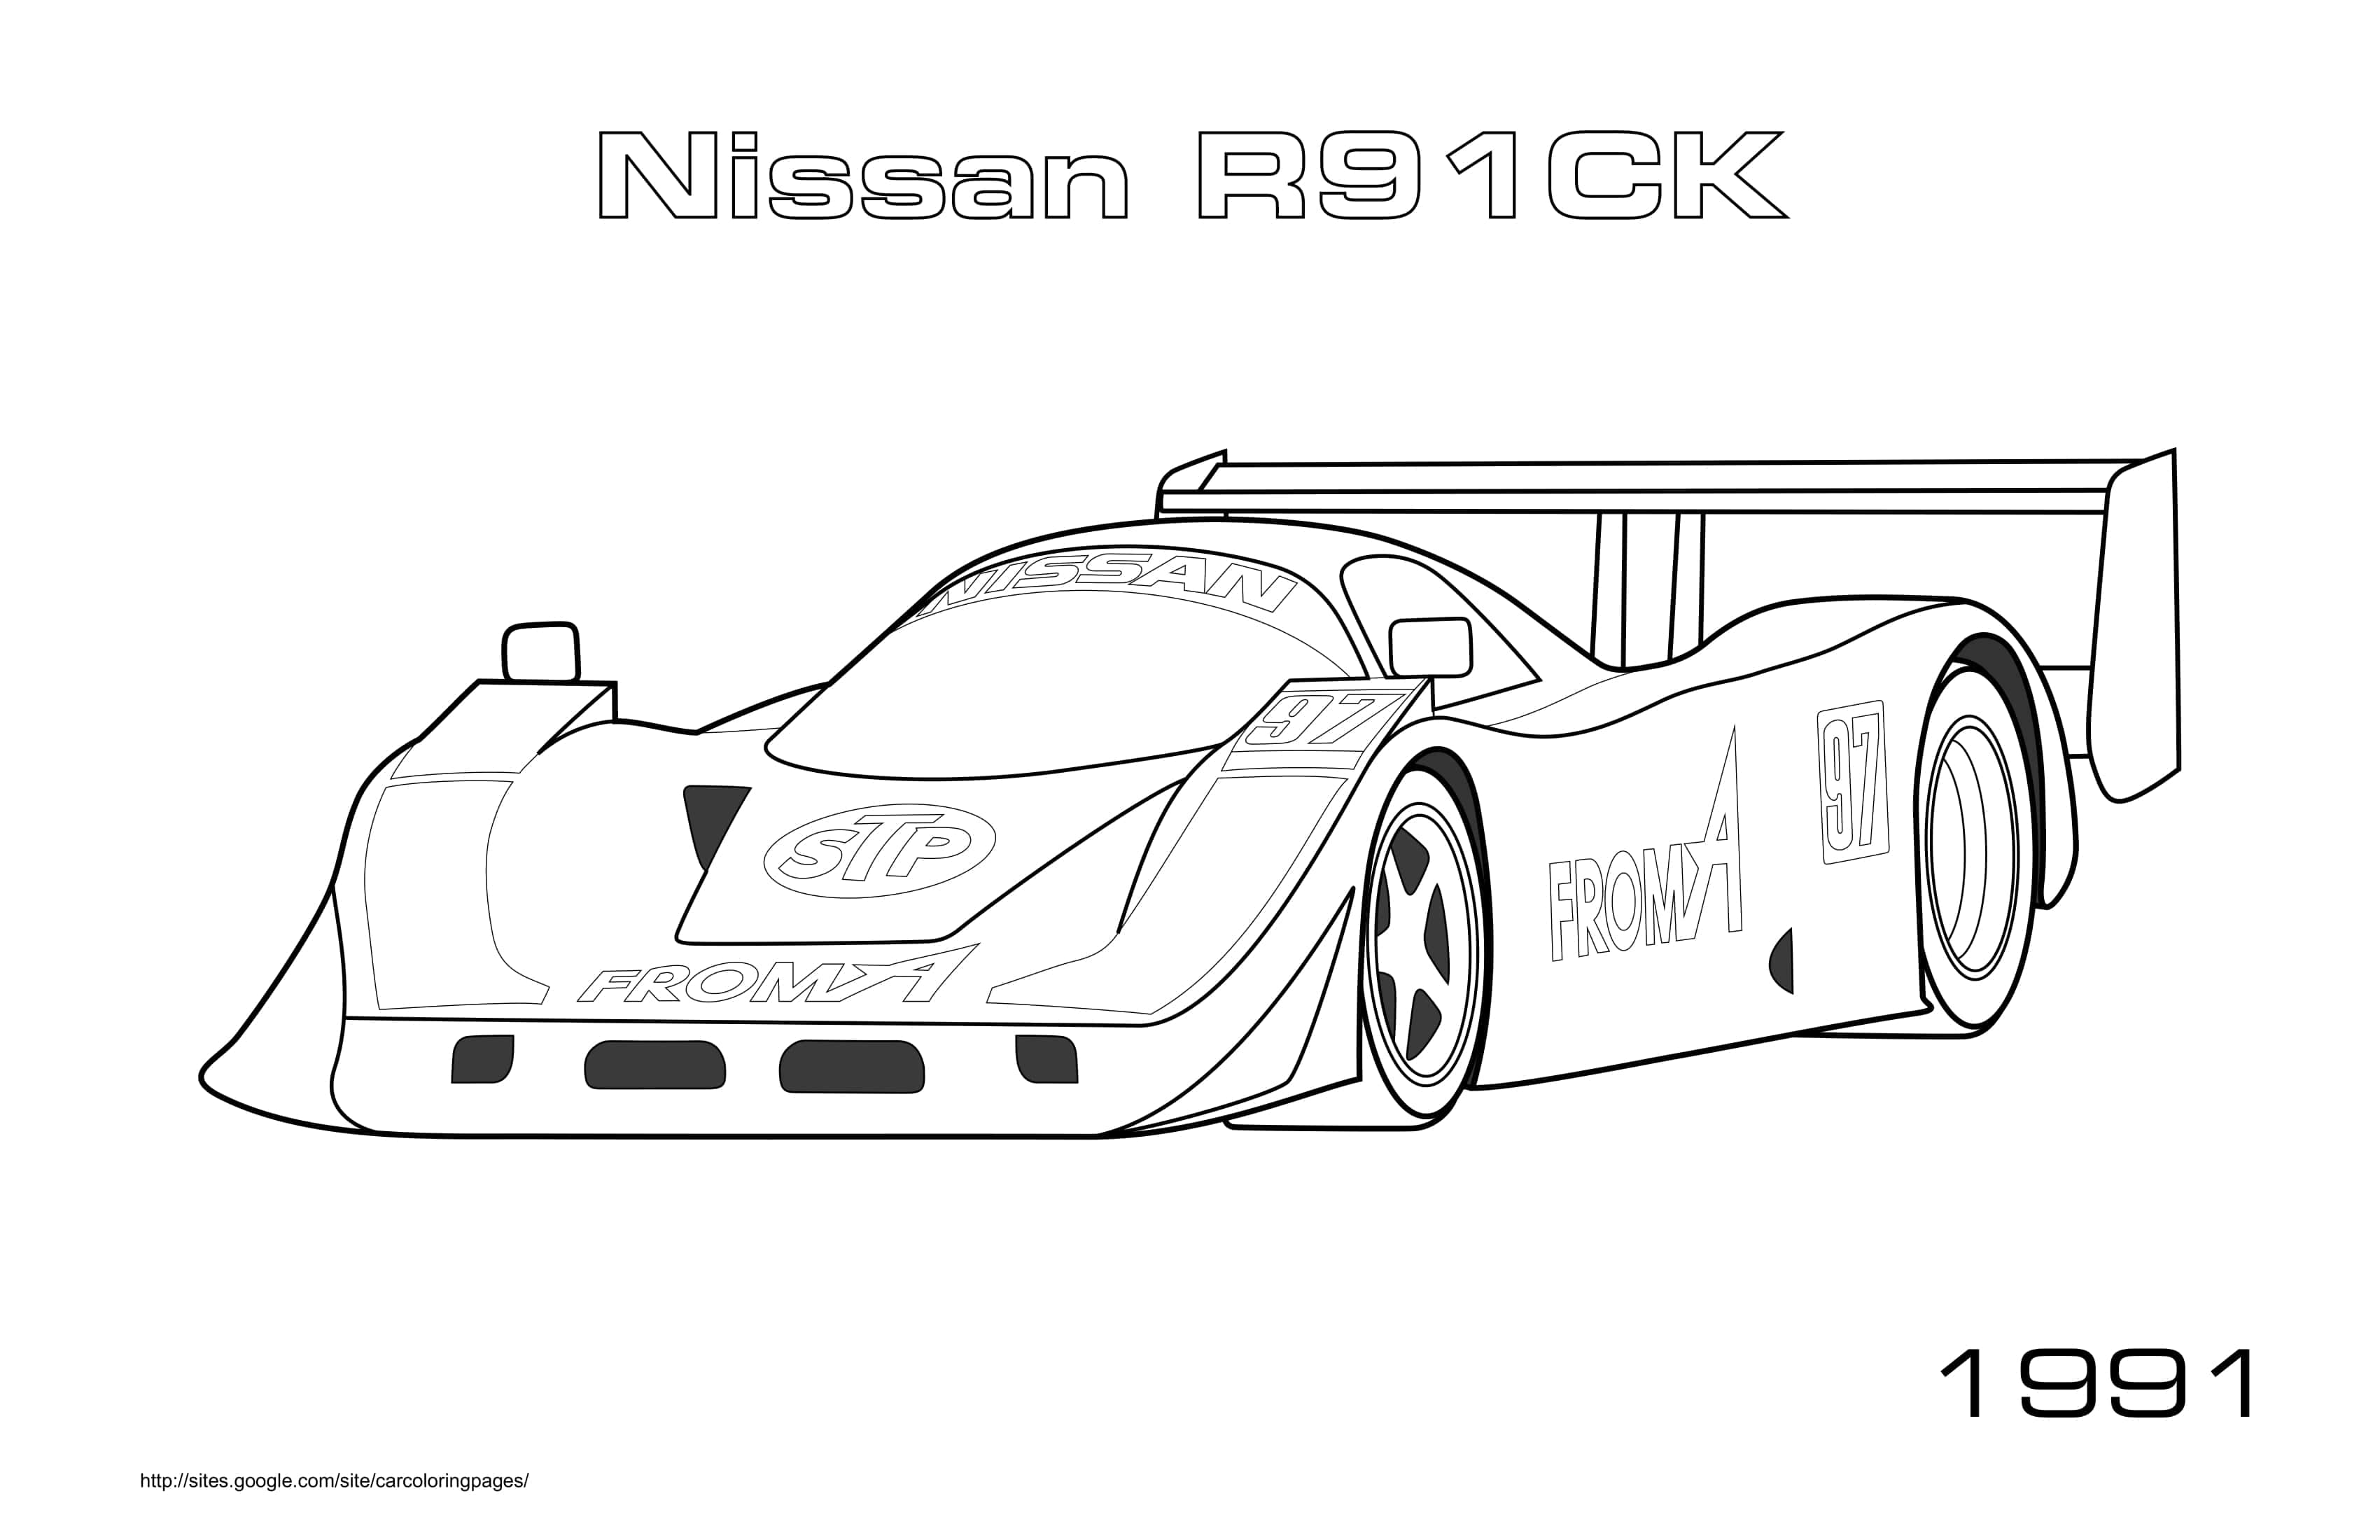 Nissan R91ck 1991 Coloring Page